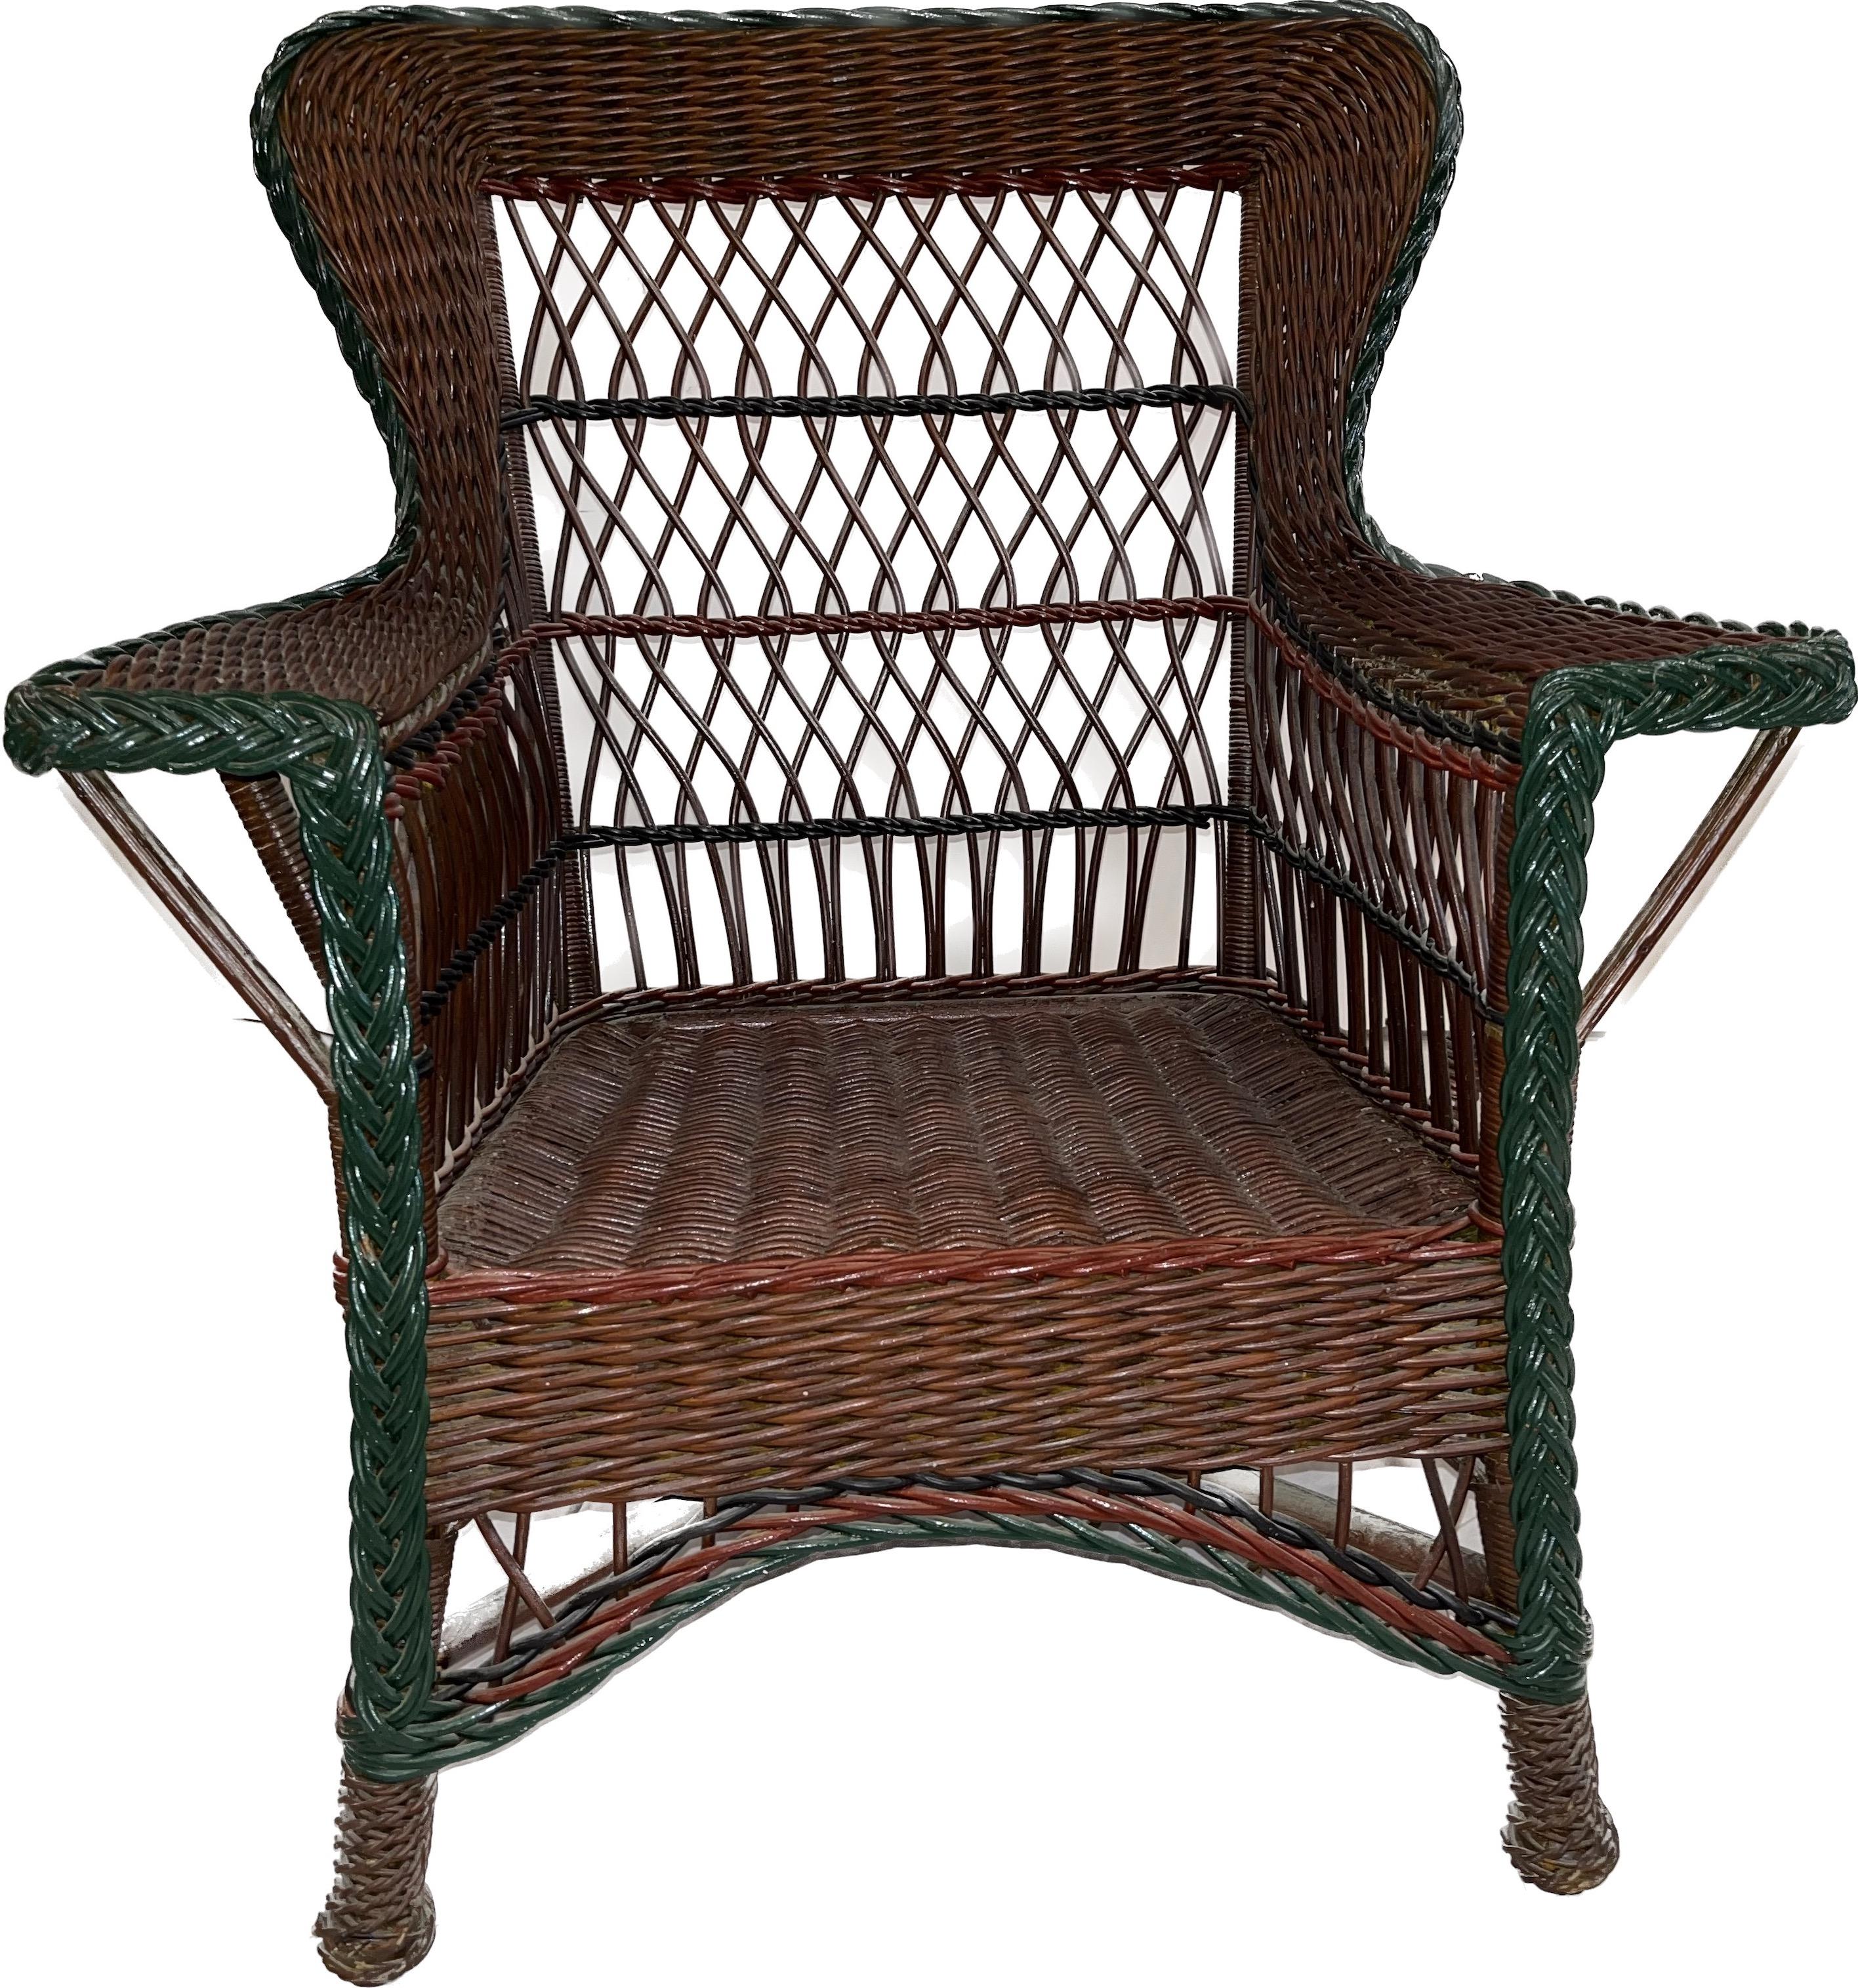 Antique Bar Harbor Style Wicker Wing Chair in Natural Finish with Green Trim For Sale 4